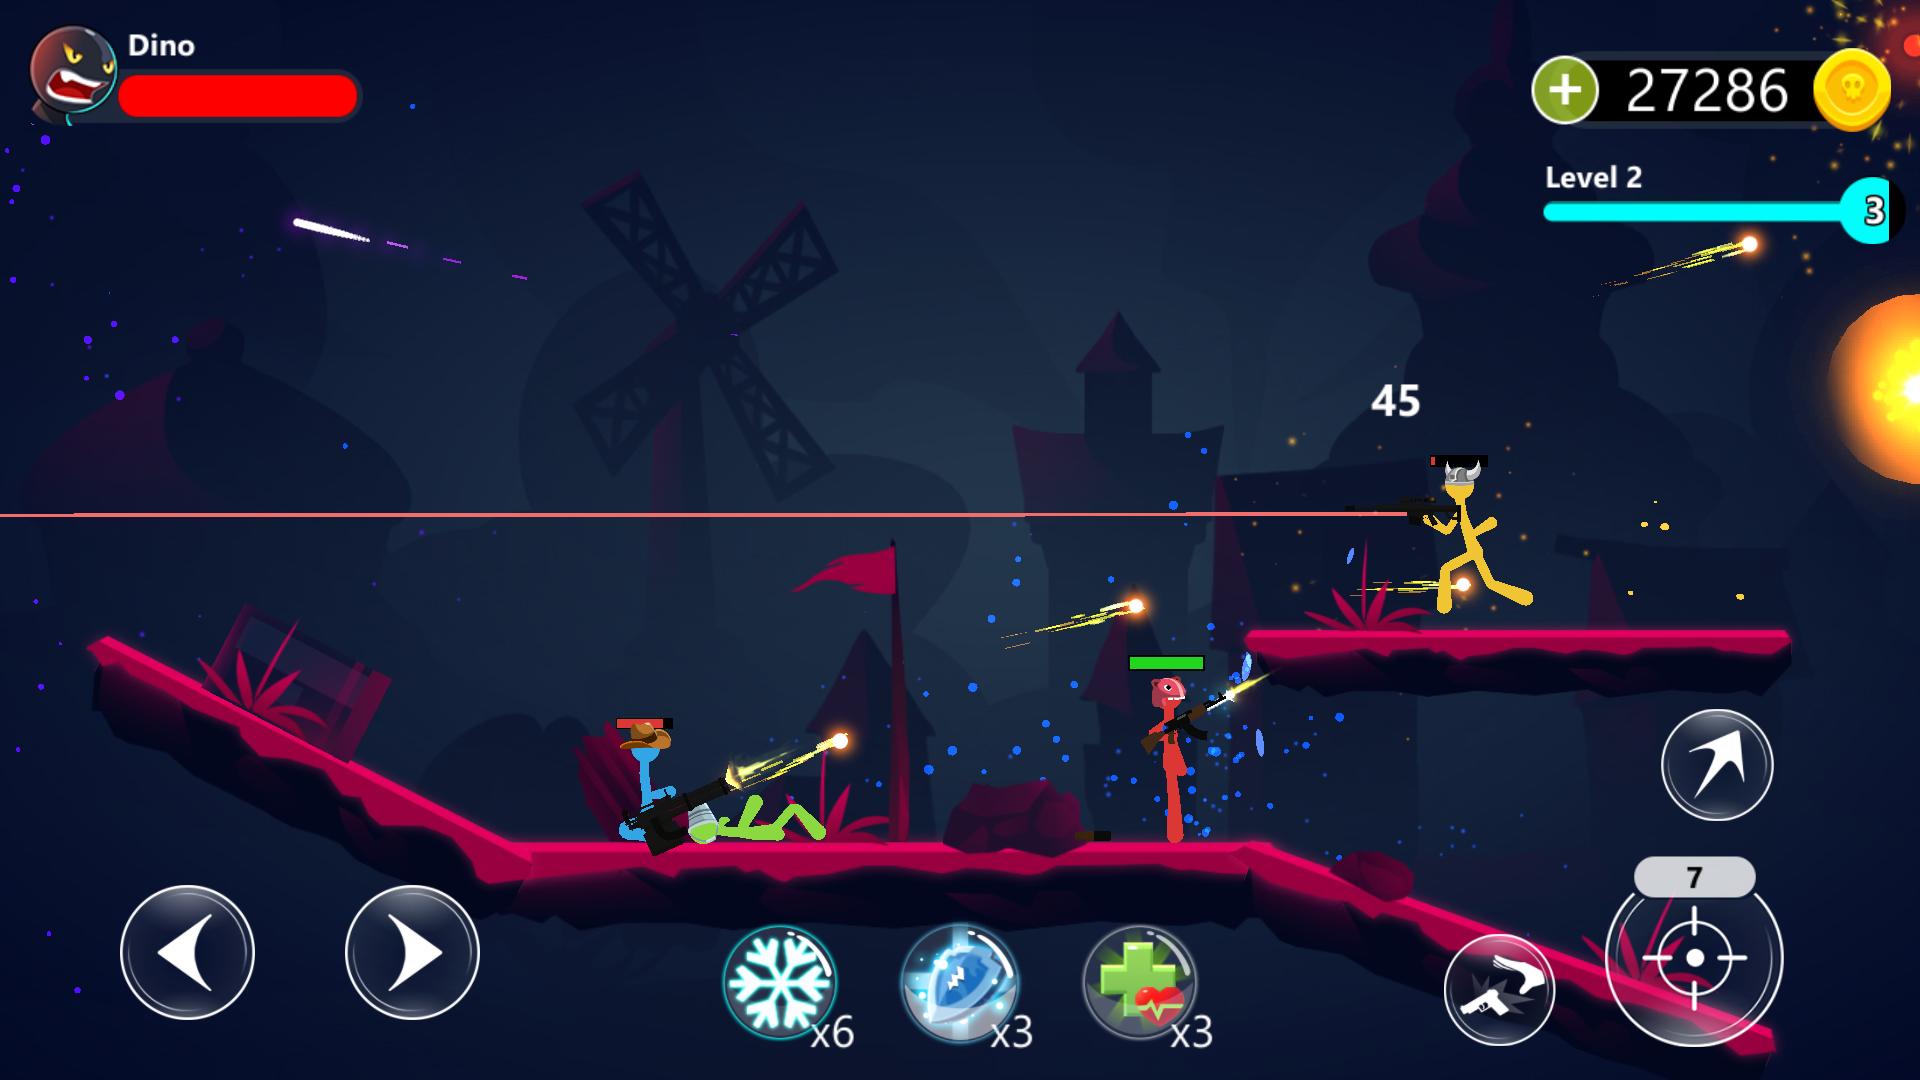 Stick Fight: The Game PC